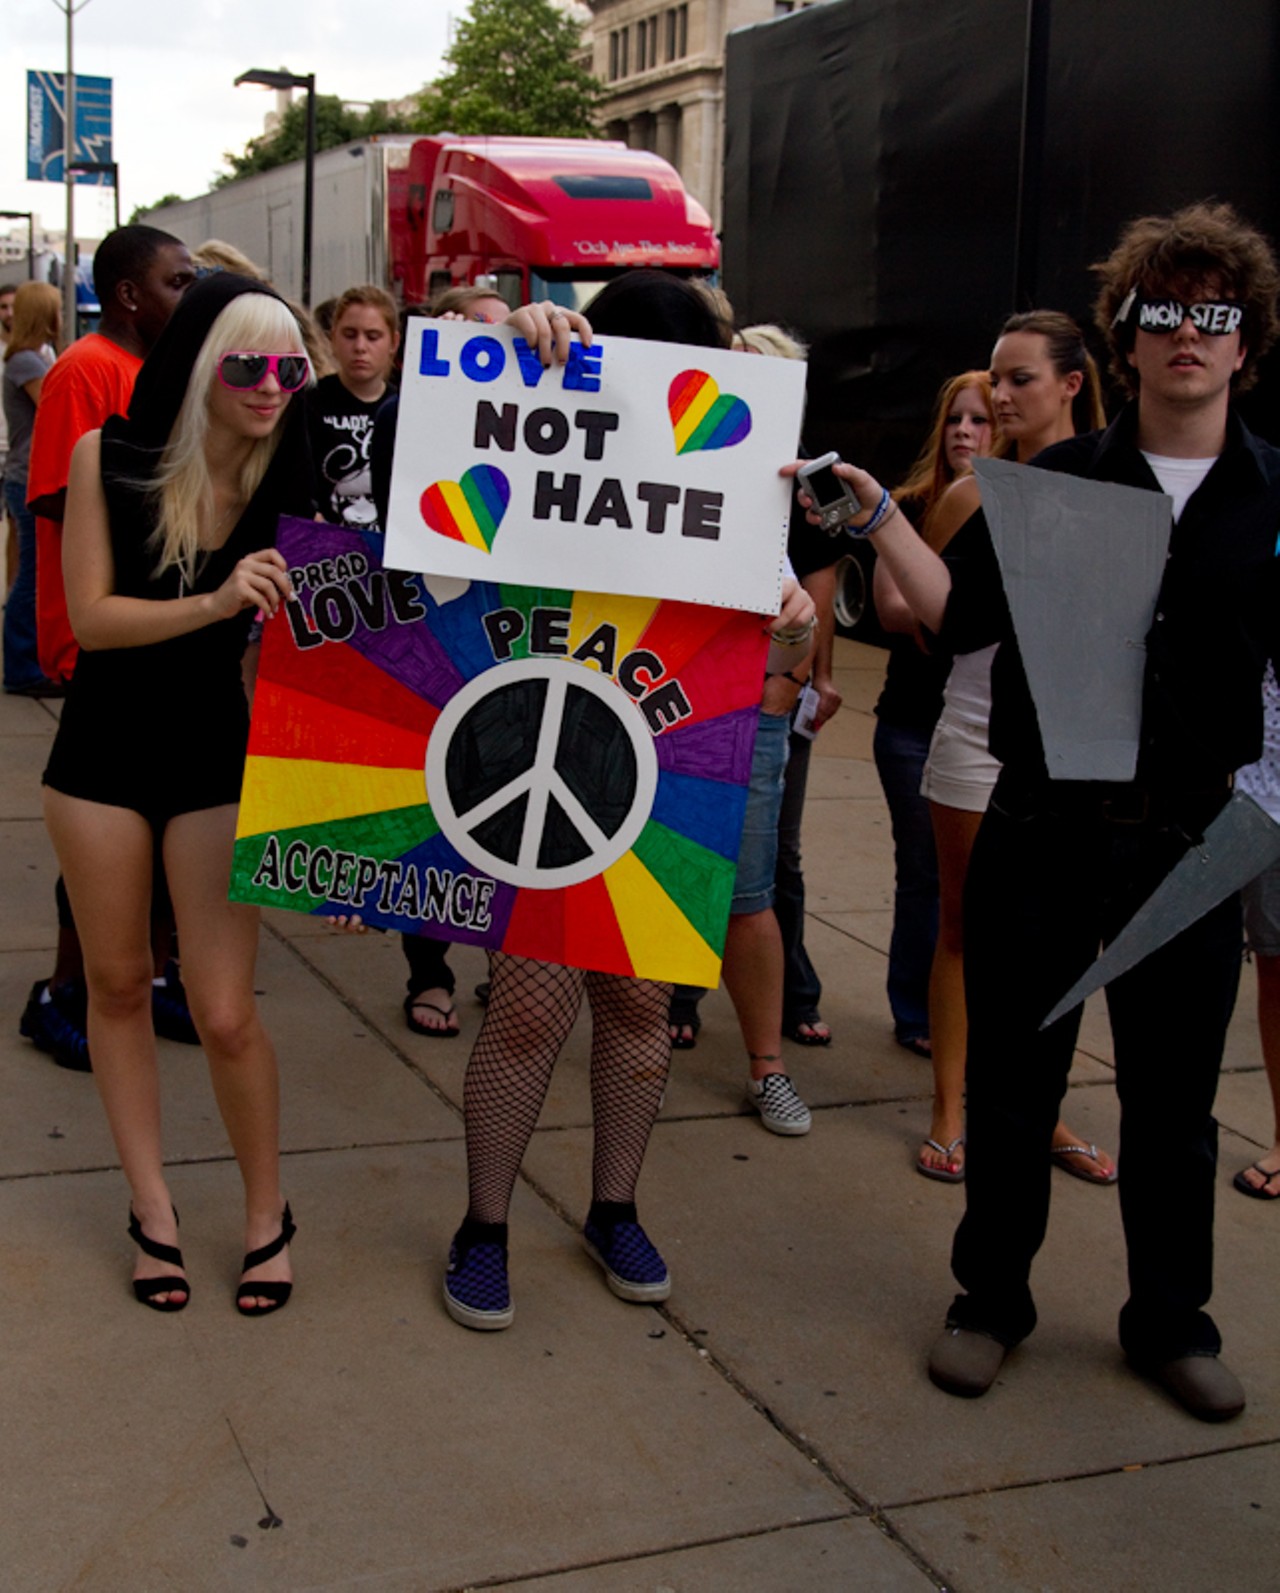 Lady Gaga's Little Monsters posing outside of the Scottrade Center in St. Louis.